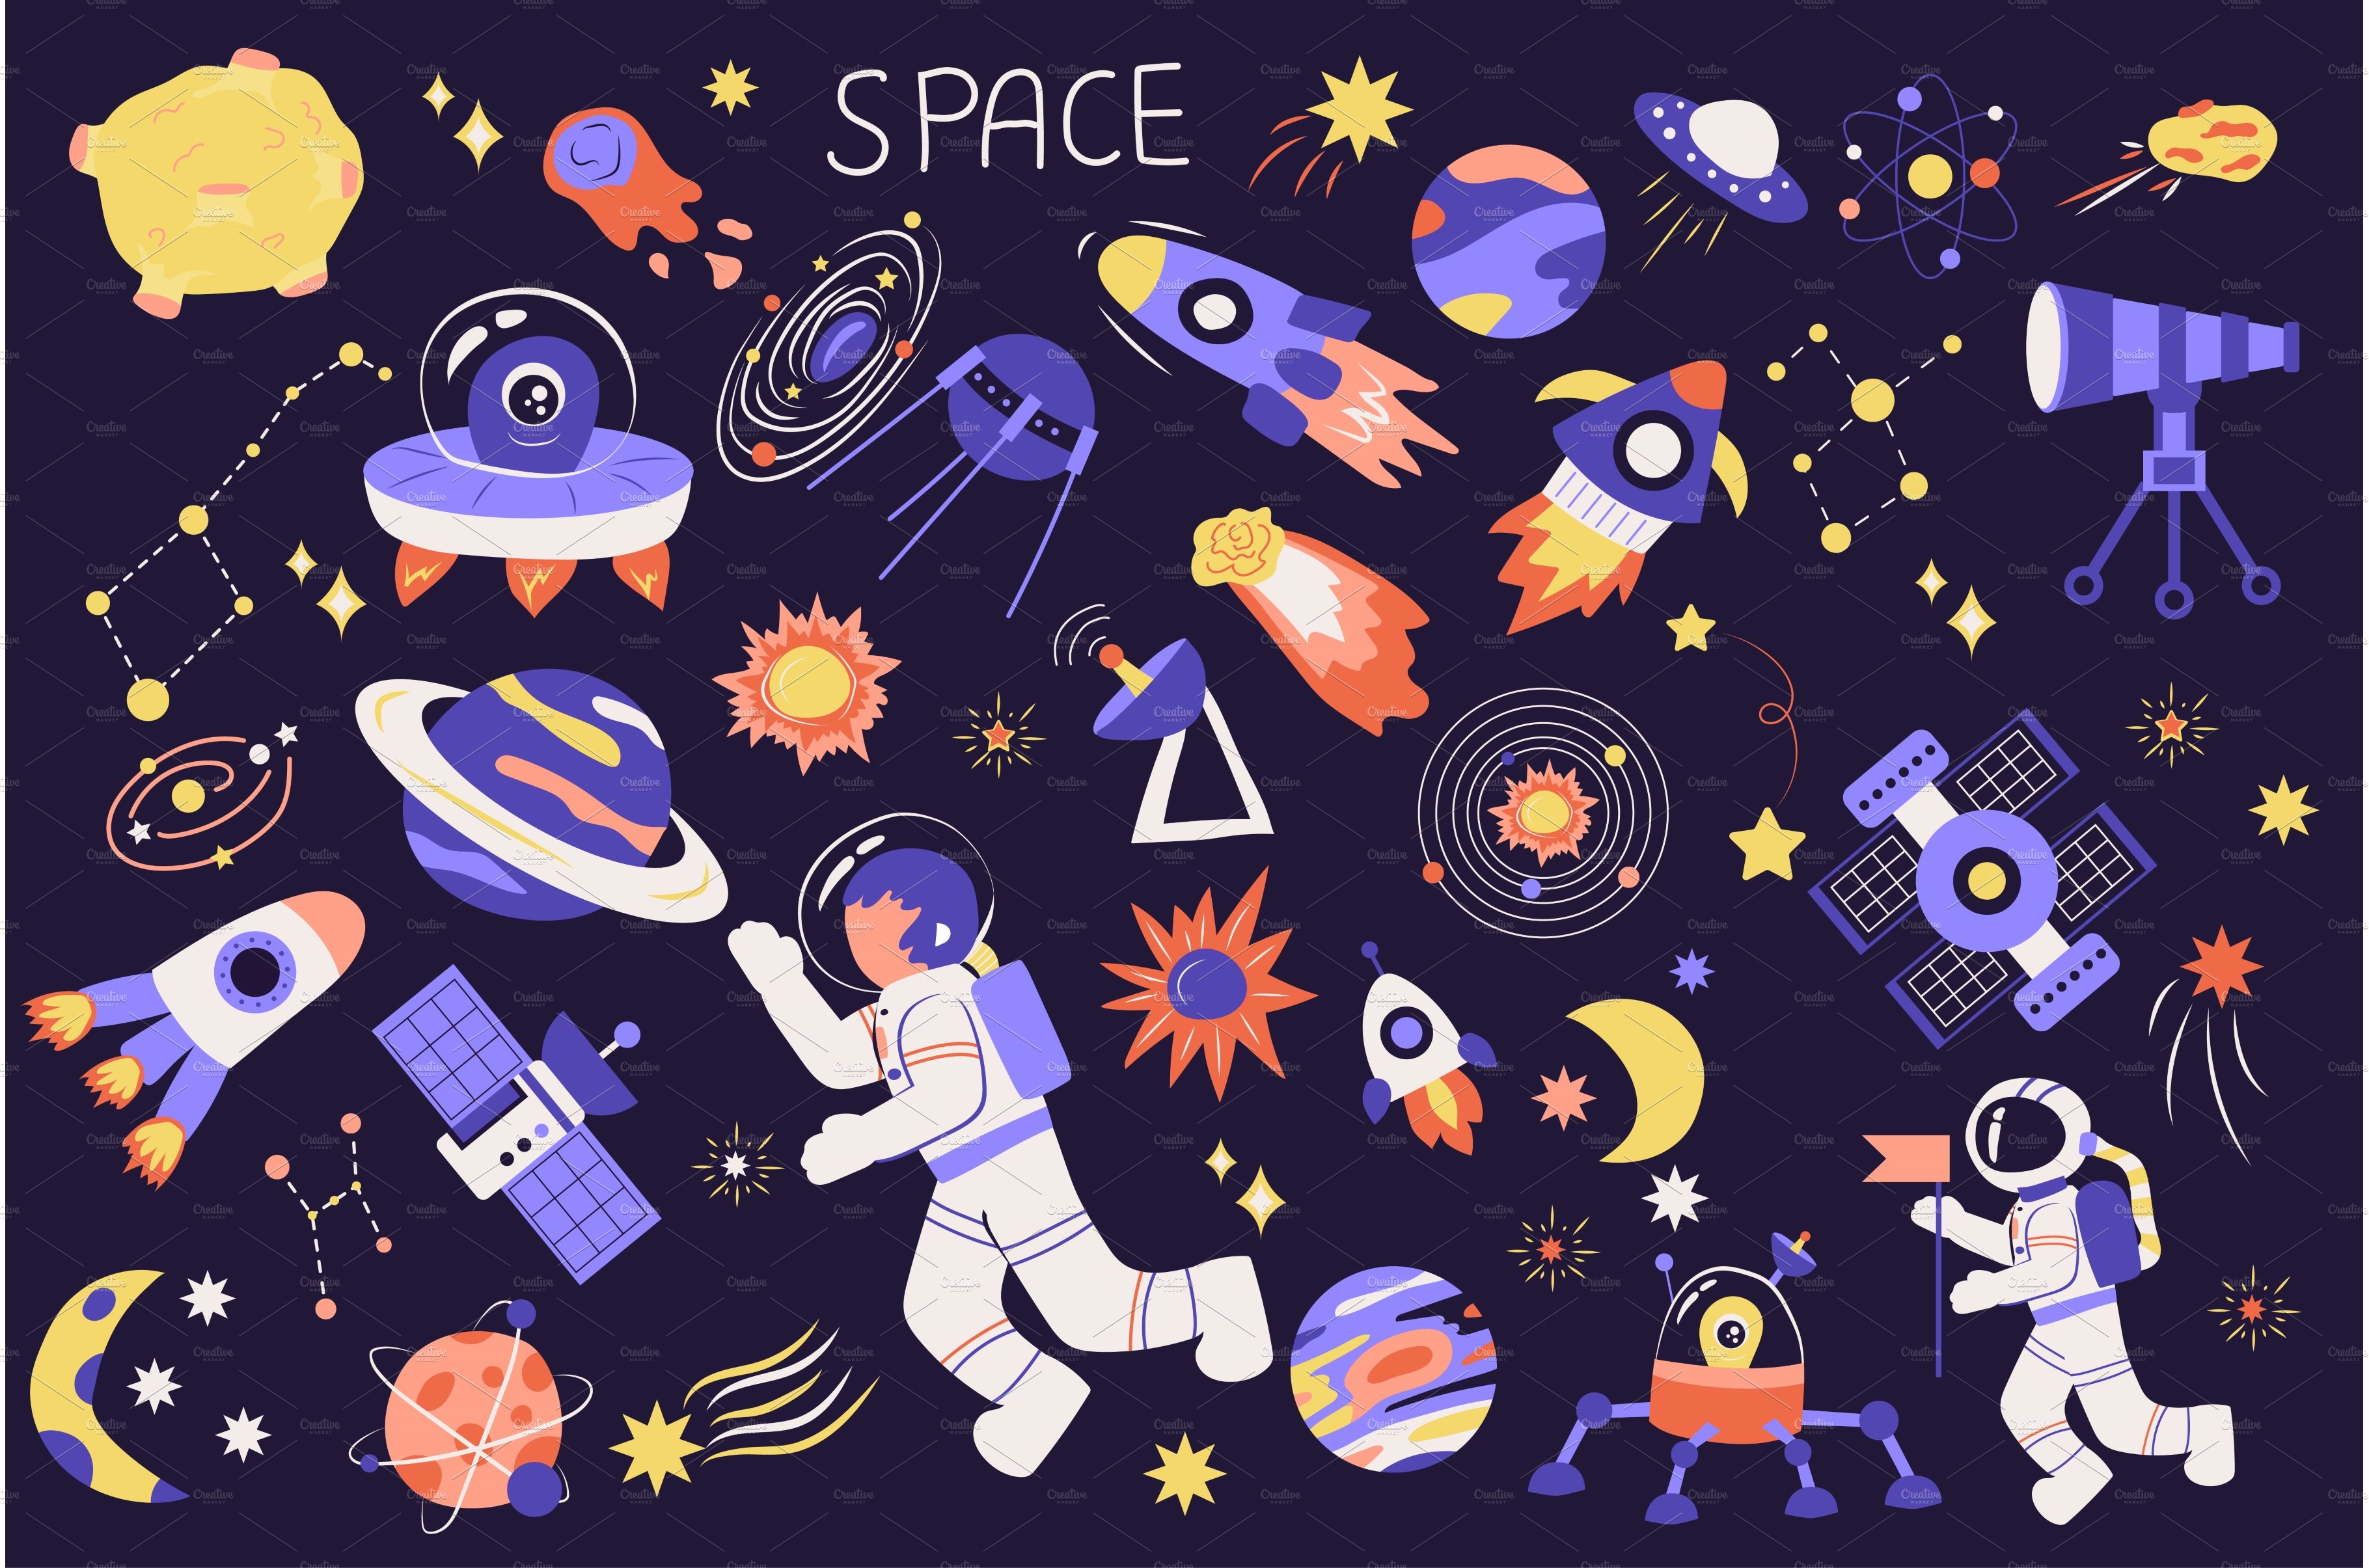 Space Cute Set cover image.